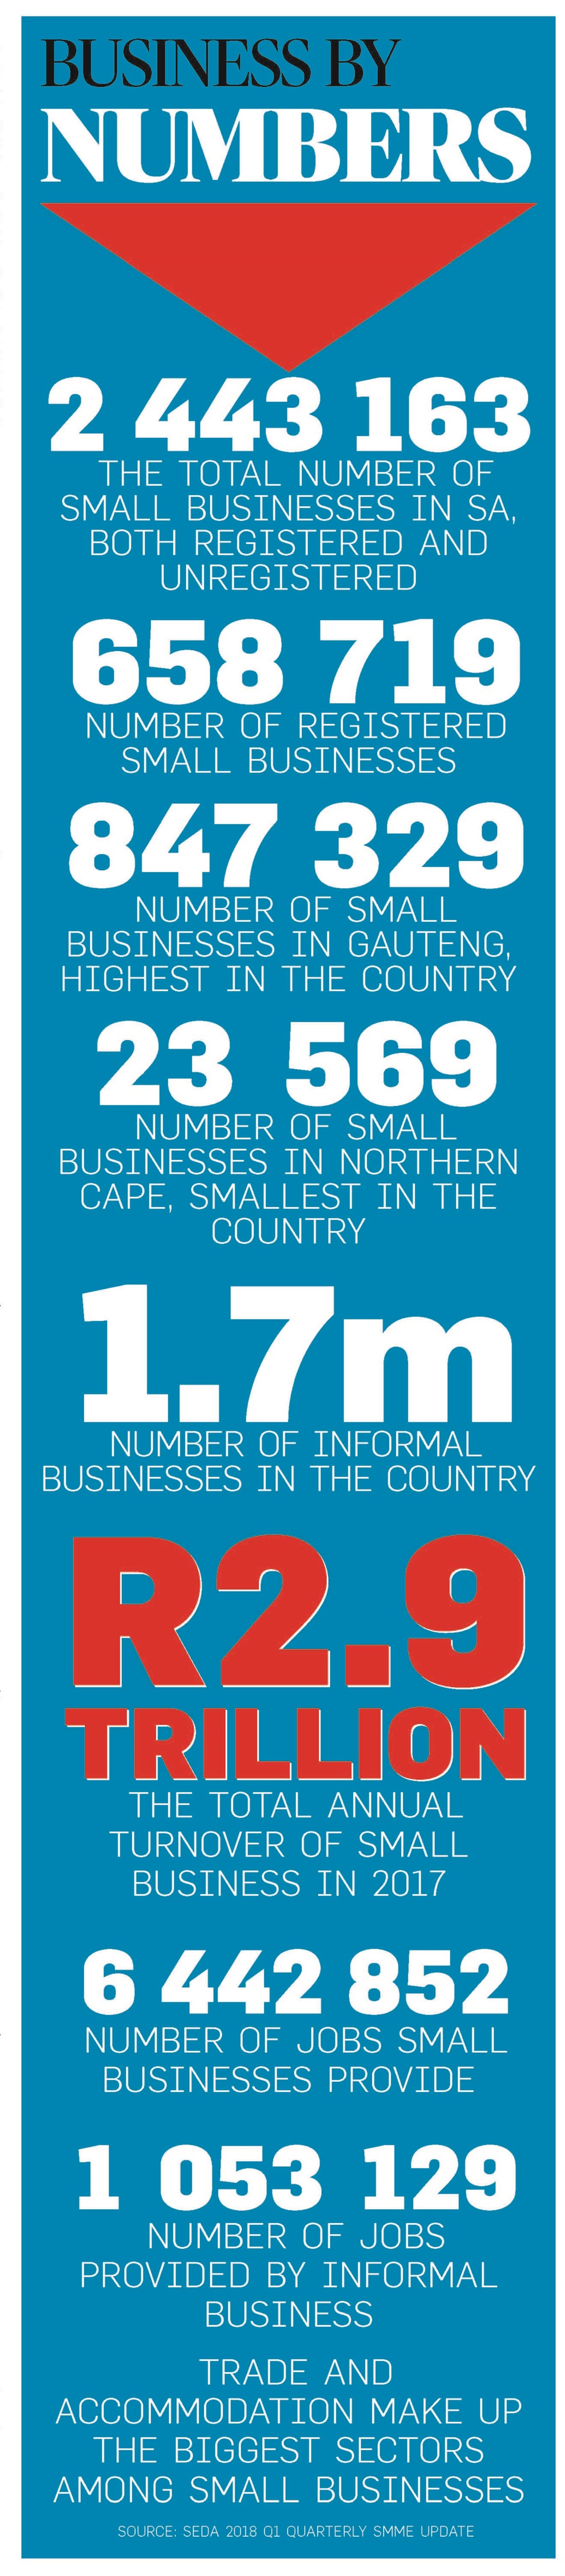 business by numbers